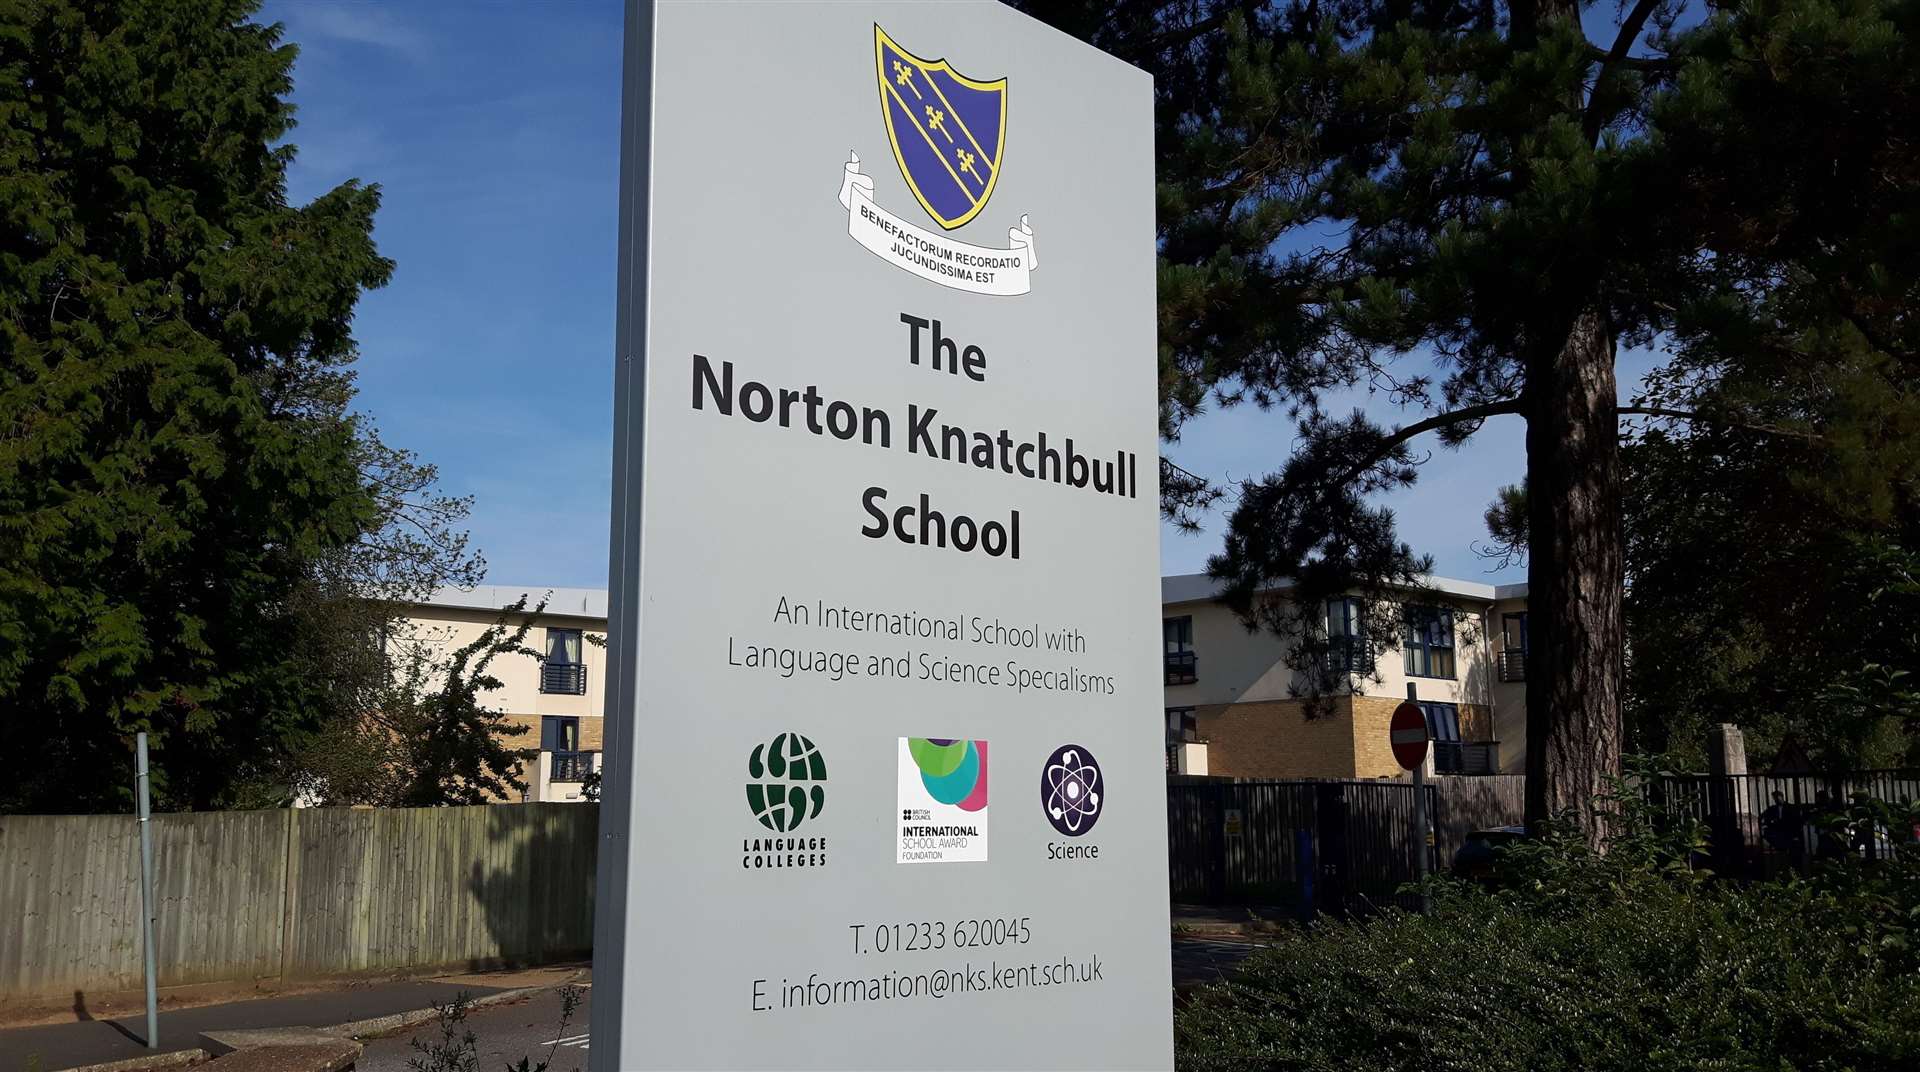 The name may be familiar - but who was Norton Knatchbull?